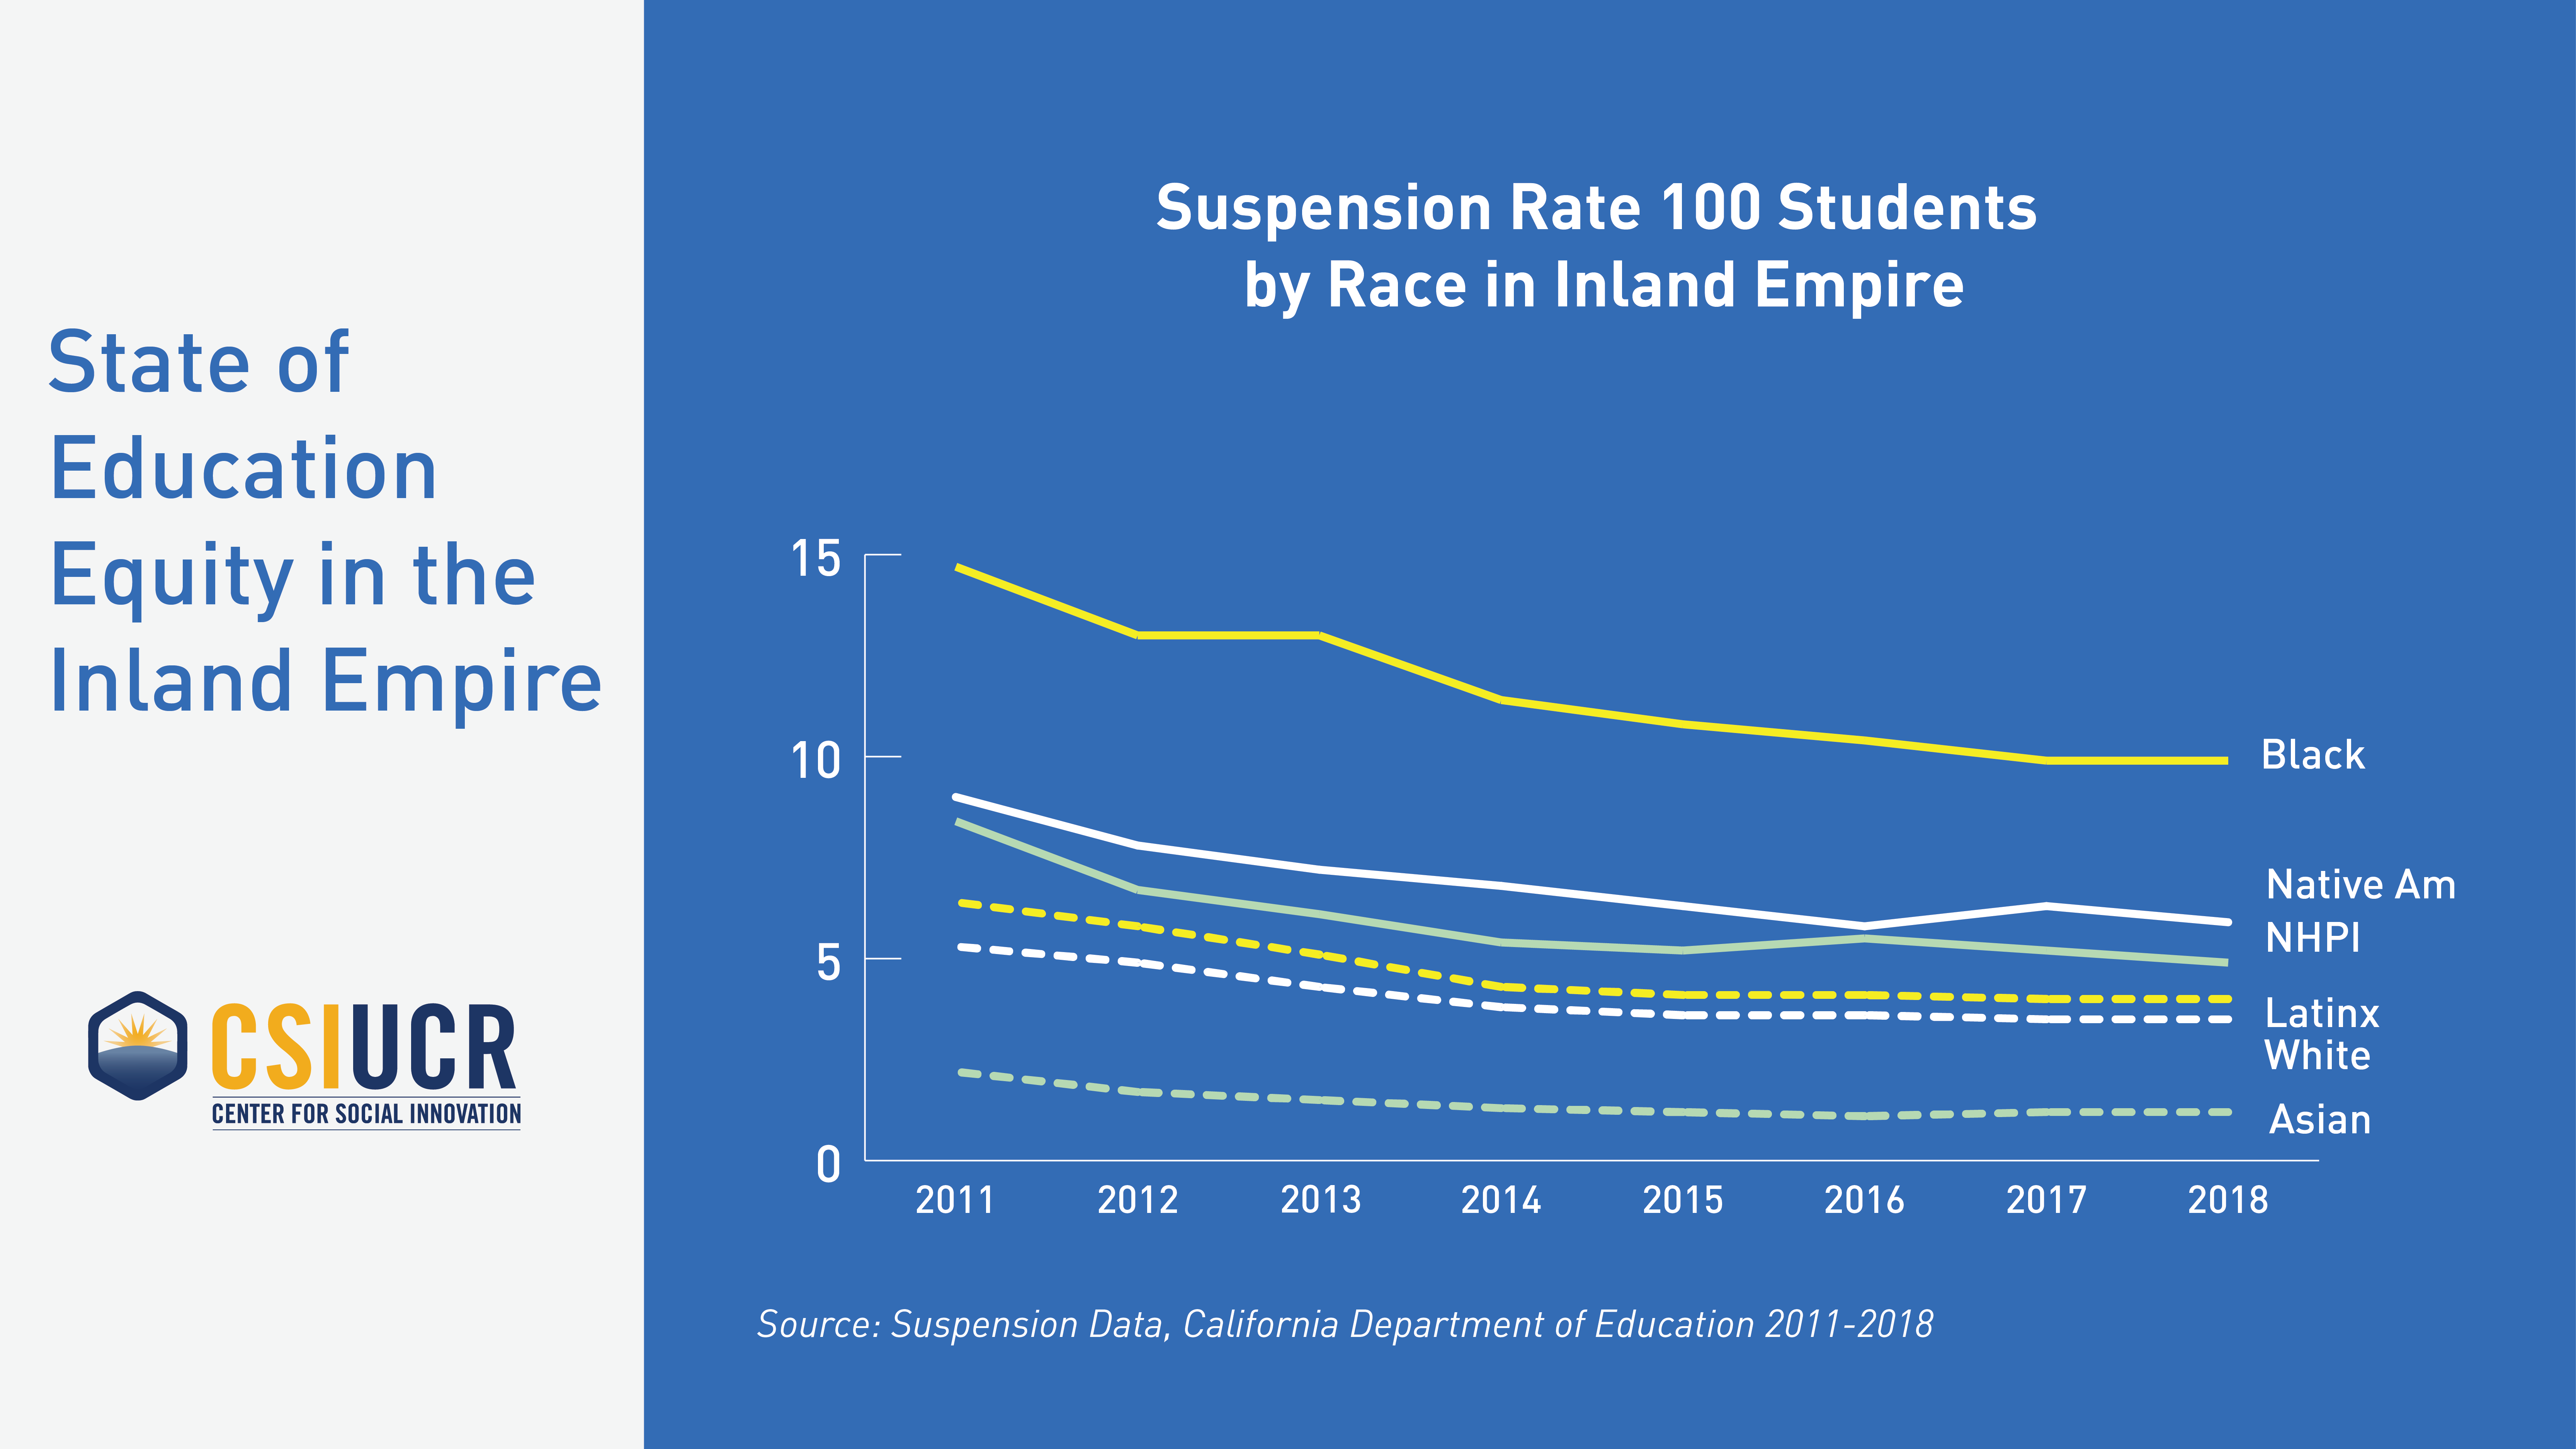 Suspension Rate 100 Students by Race in the IE